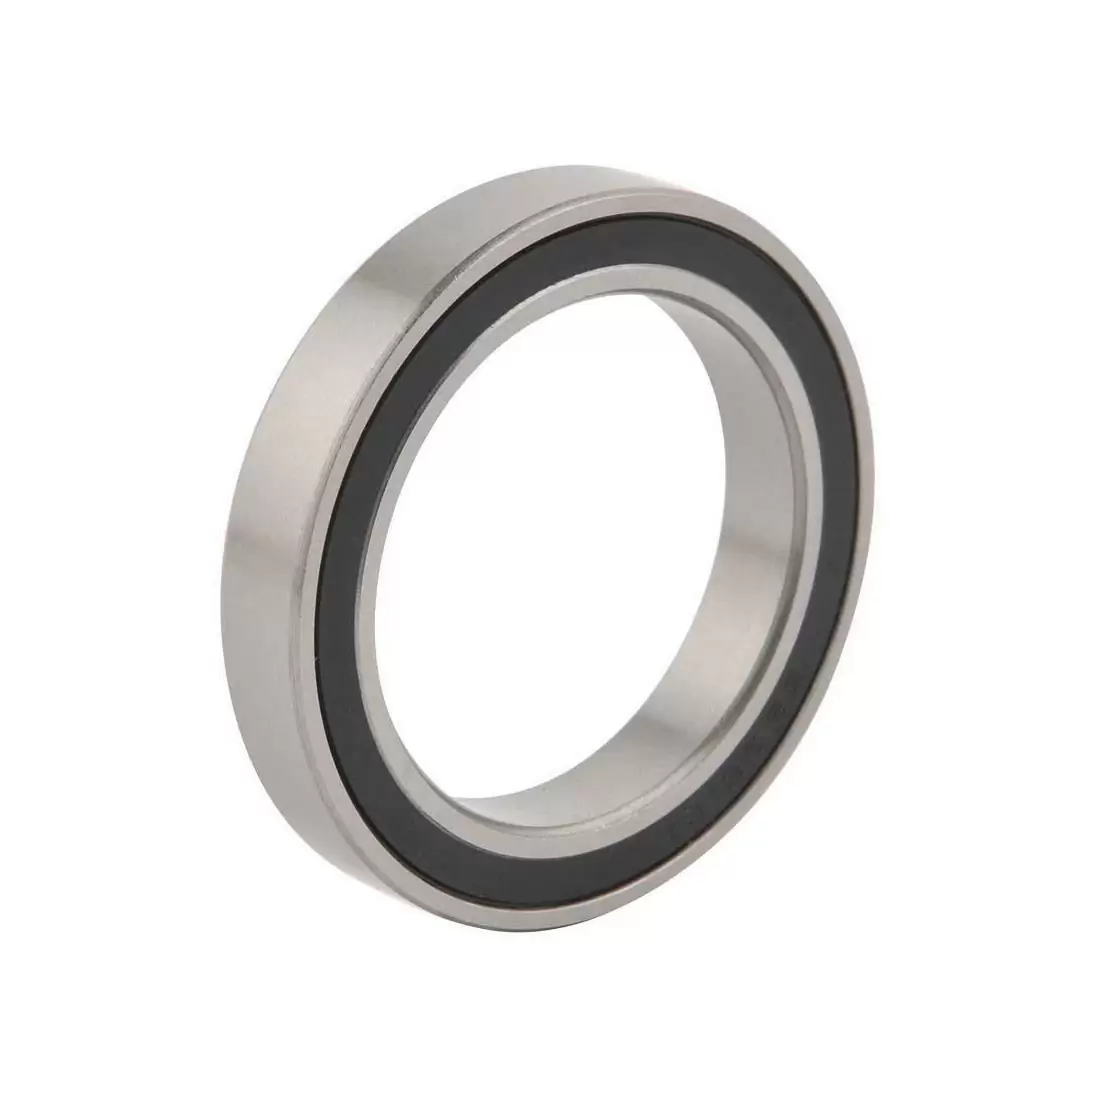 Bearings 61806-2rs 42-30-7mm (D-d-B) universal for BB30 - image